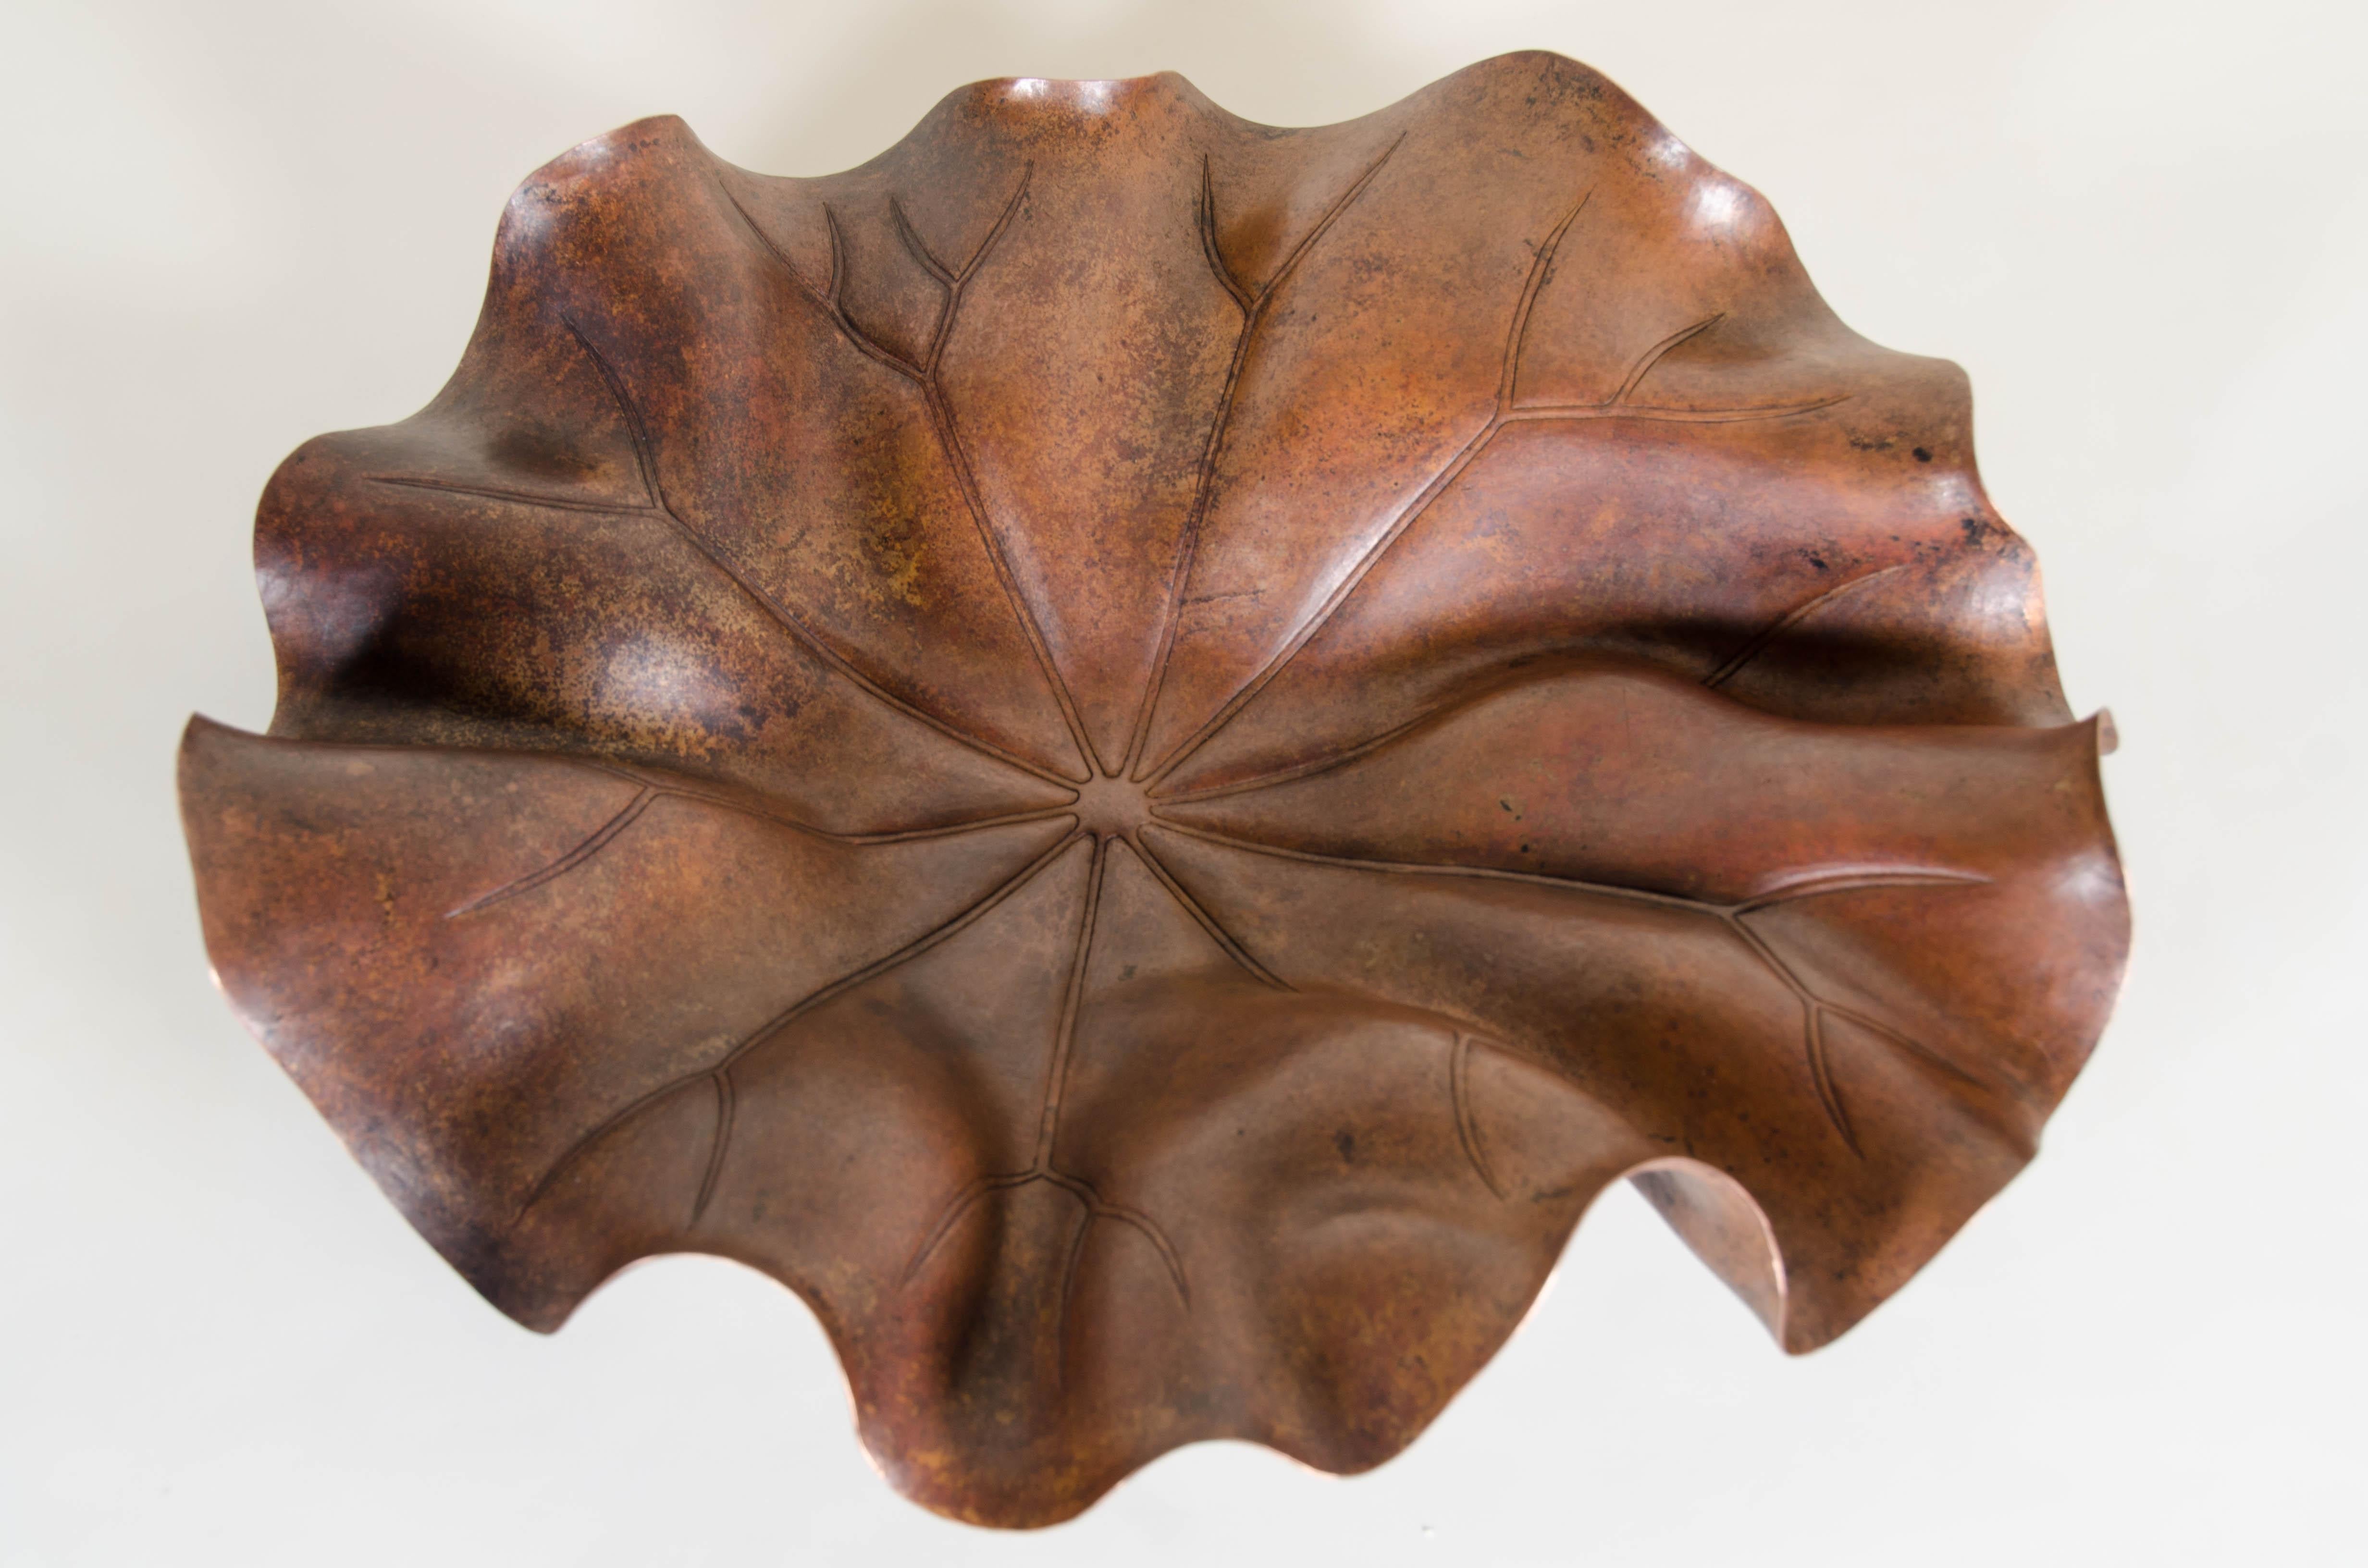 Contemporary Lotus Leaf Plate, Antique Copper by Robert Kuo, Hand Repoussé, Limited Edition For Sale